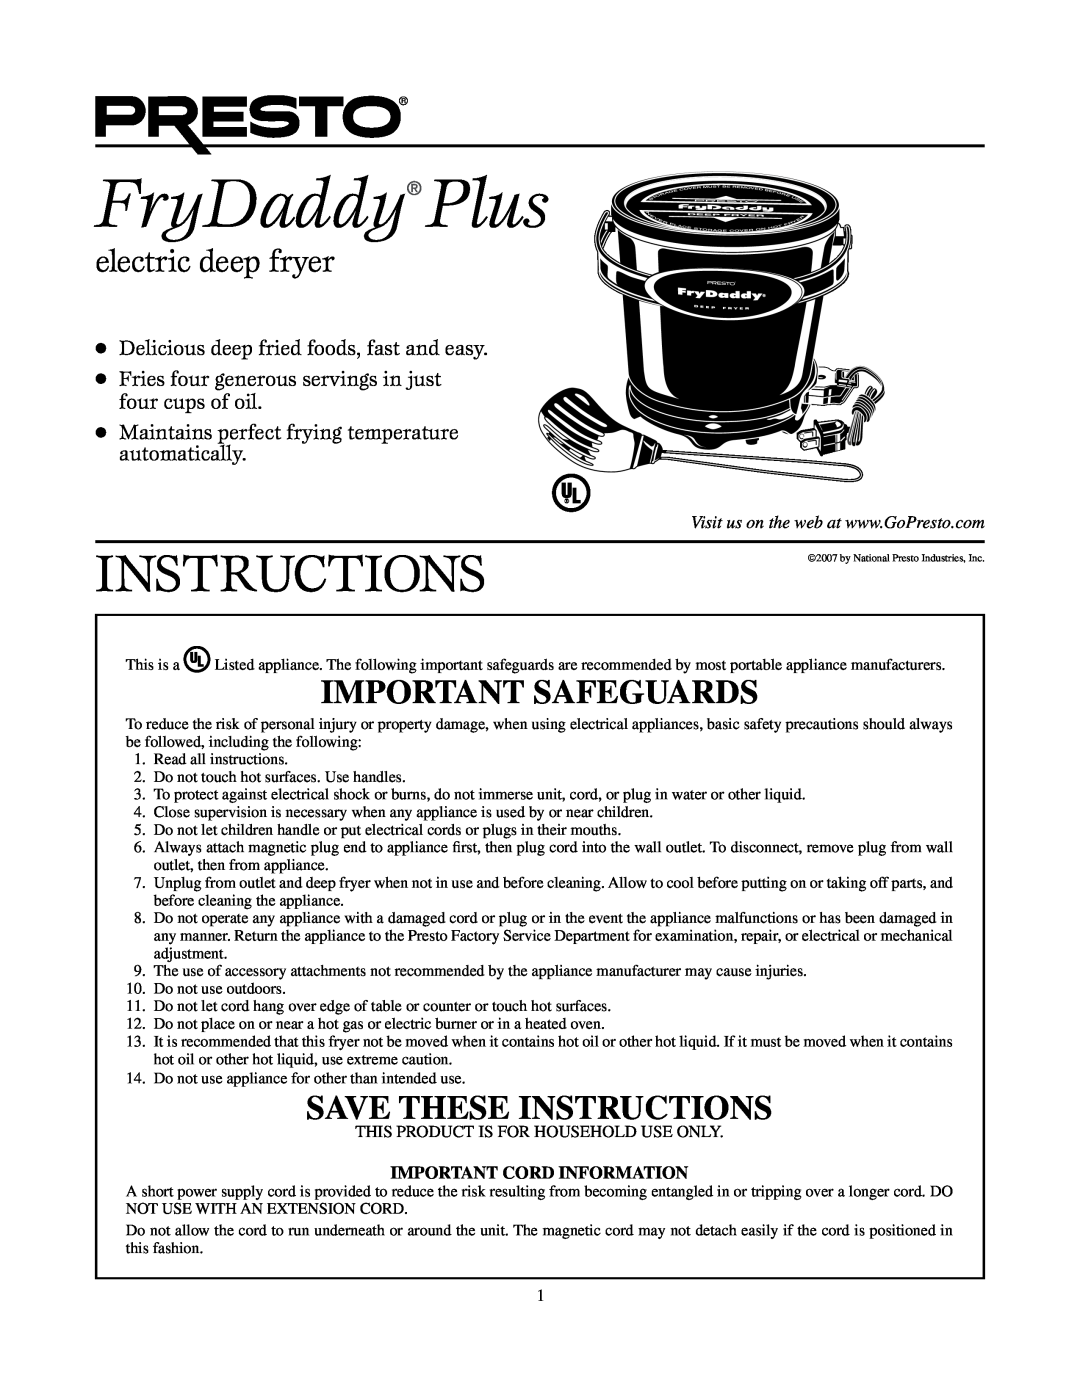 Presto manual FryDaddy Plus, Important Safeguards, Save These Instructions, electric deep fryer 